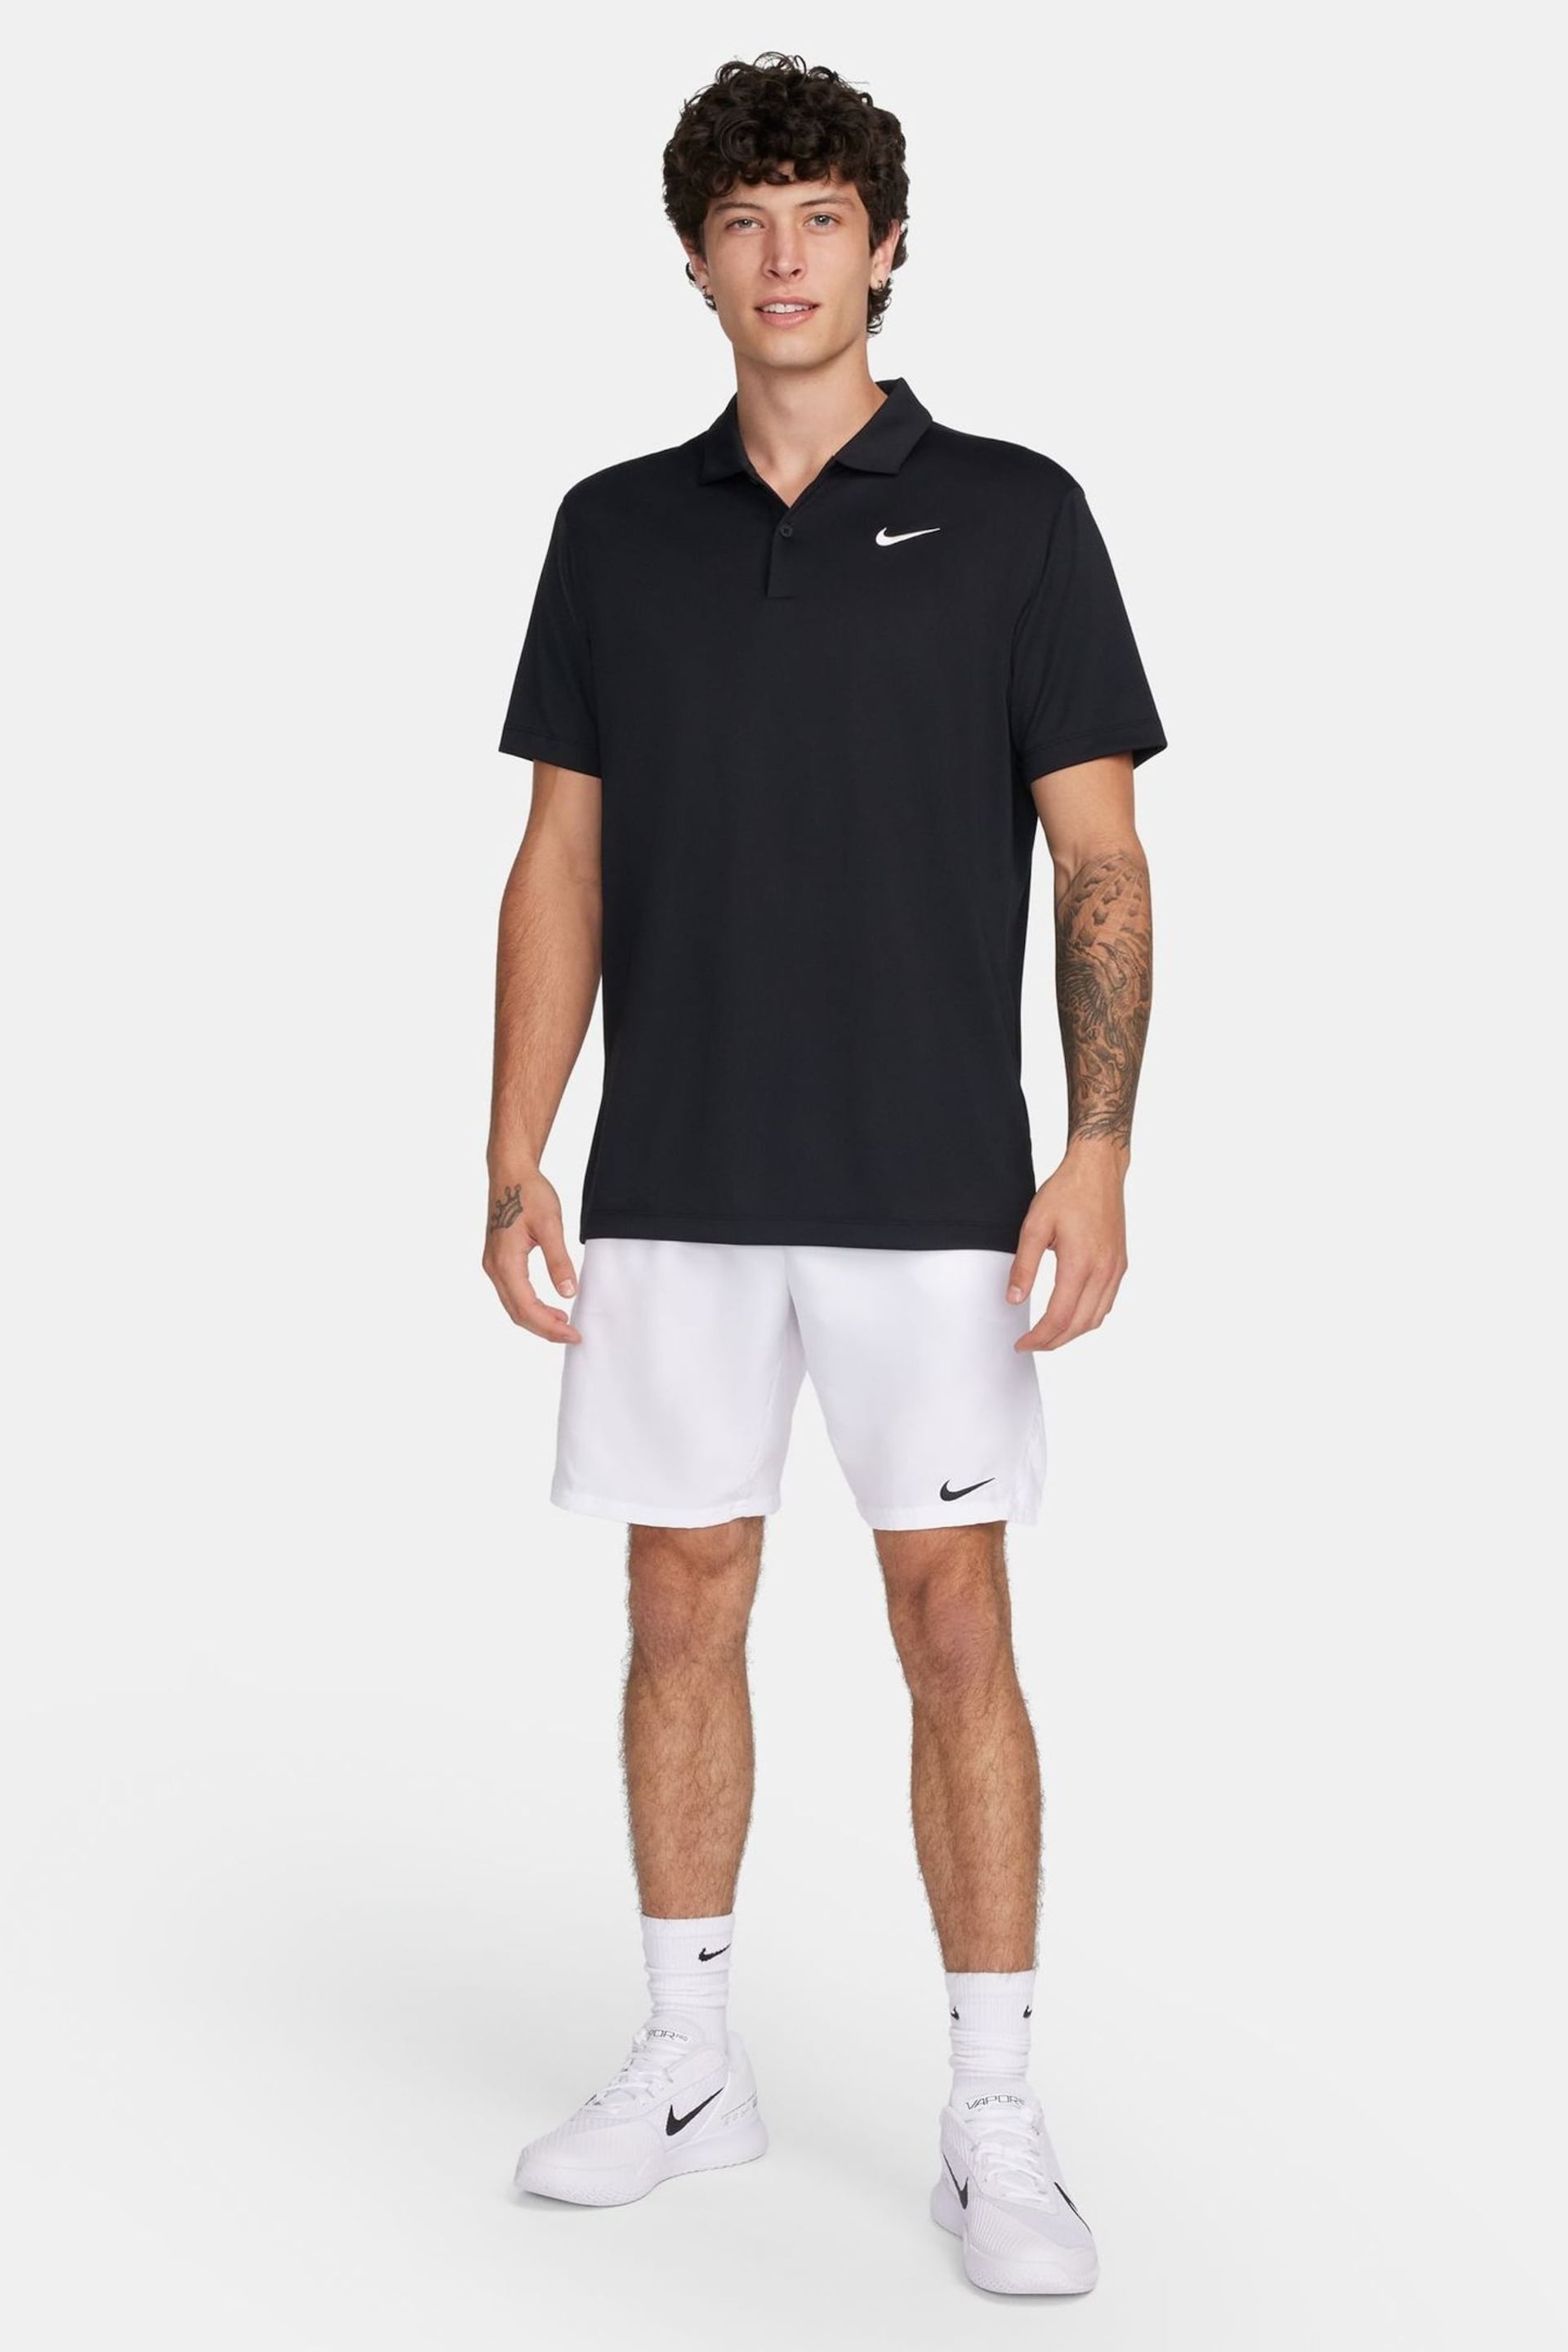 Nike White 9 Inch Court Victory Dri-FIT 9 inch Tennis Shorts - Image 6 of 6